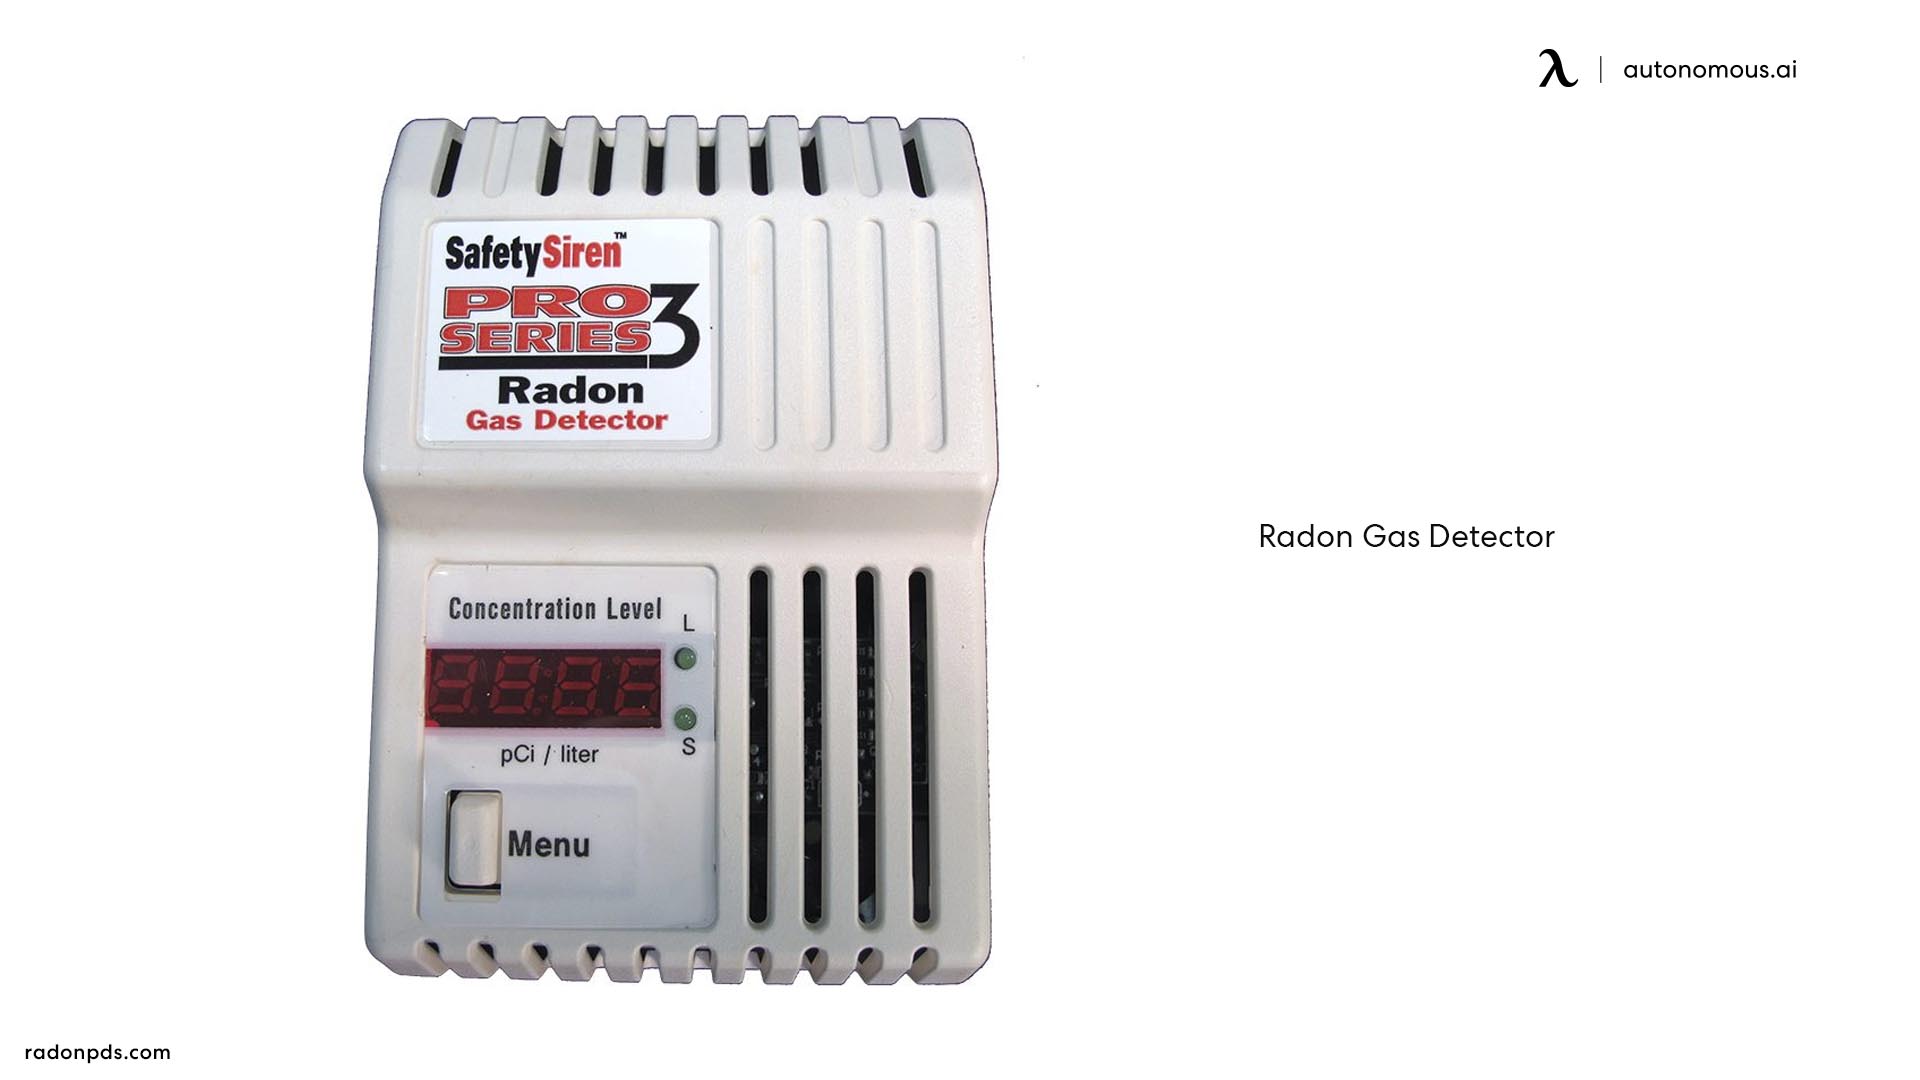 Radon Gas Detector for workplace air quality